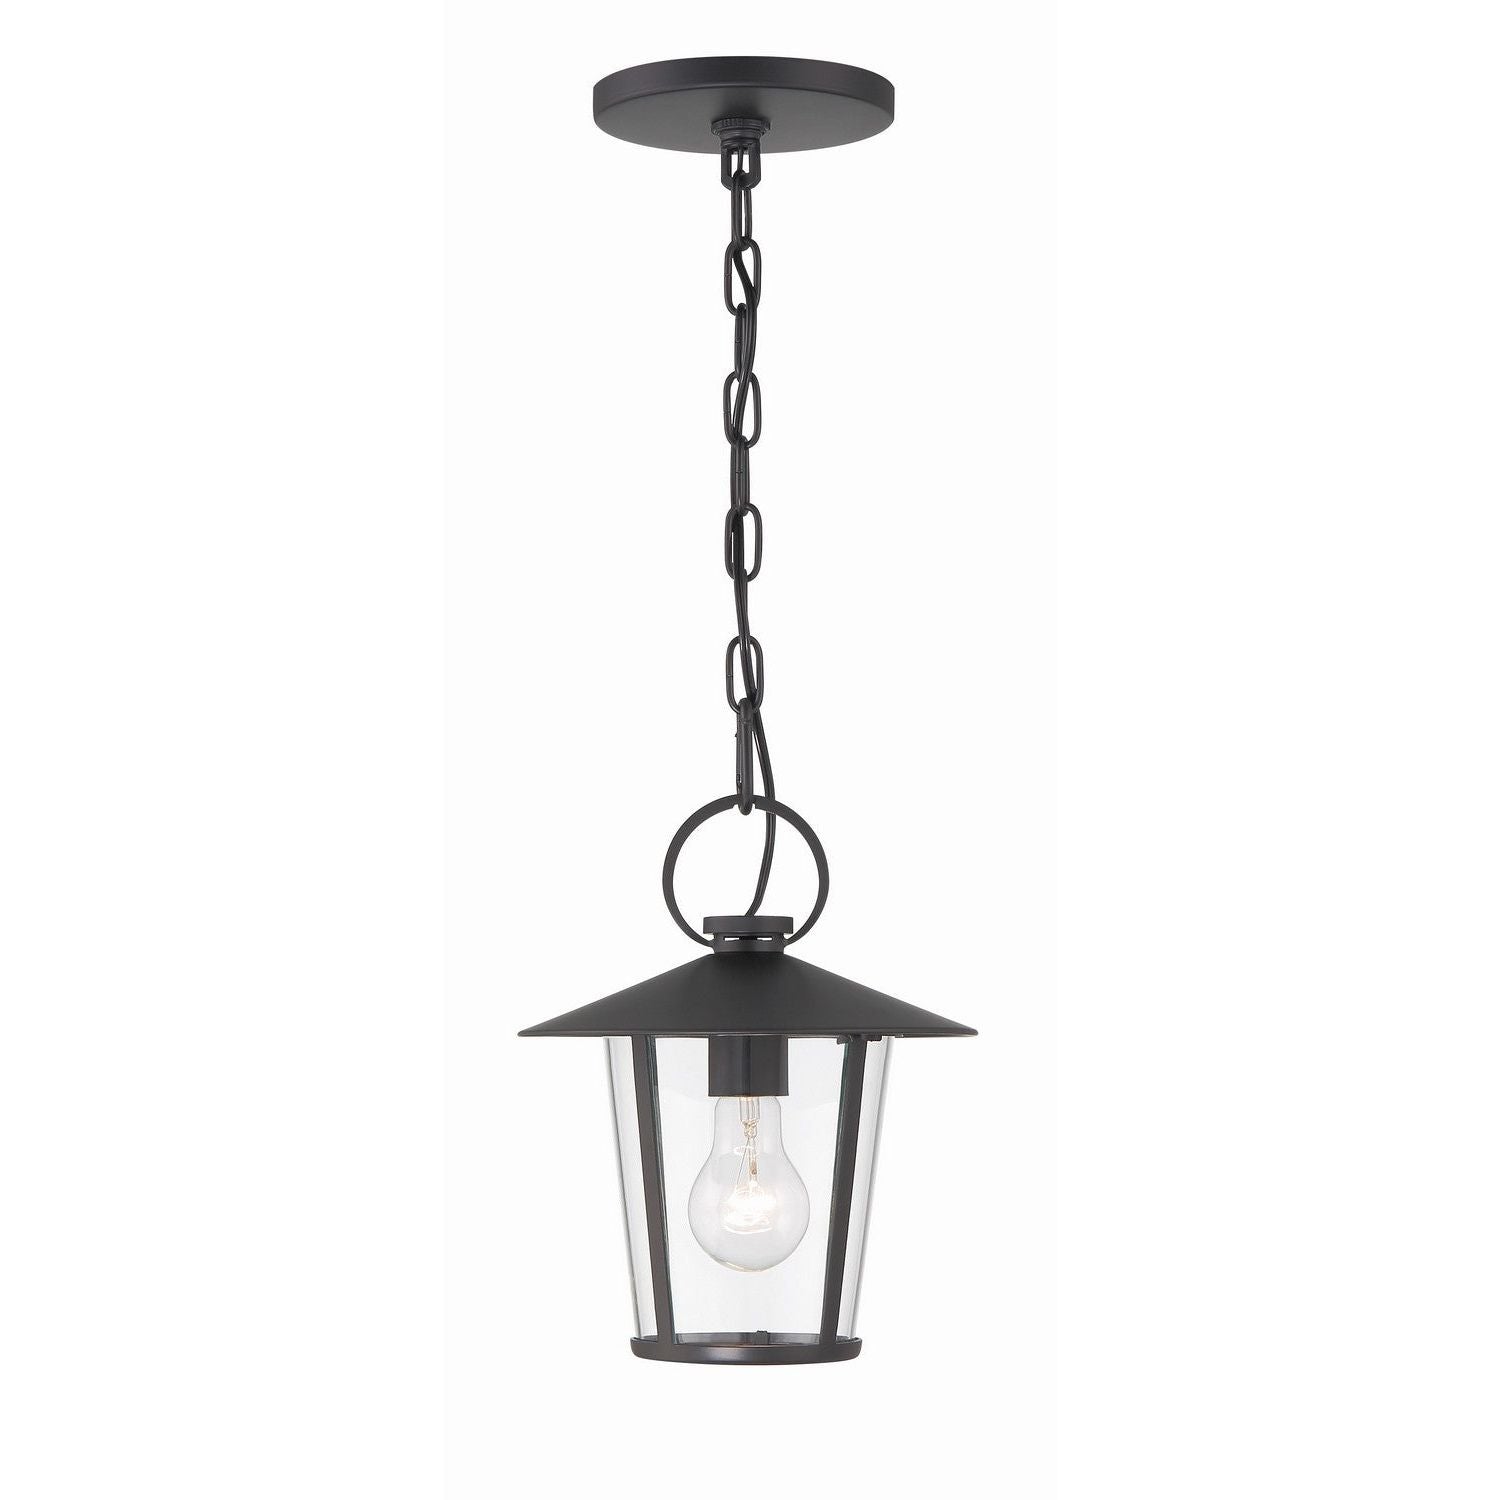 Crystorama - AND-9203-CL-MK - One Light Outdoor Chandelier - Andover - Matte Black